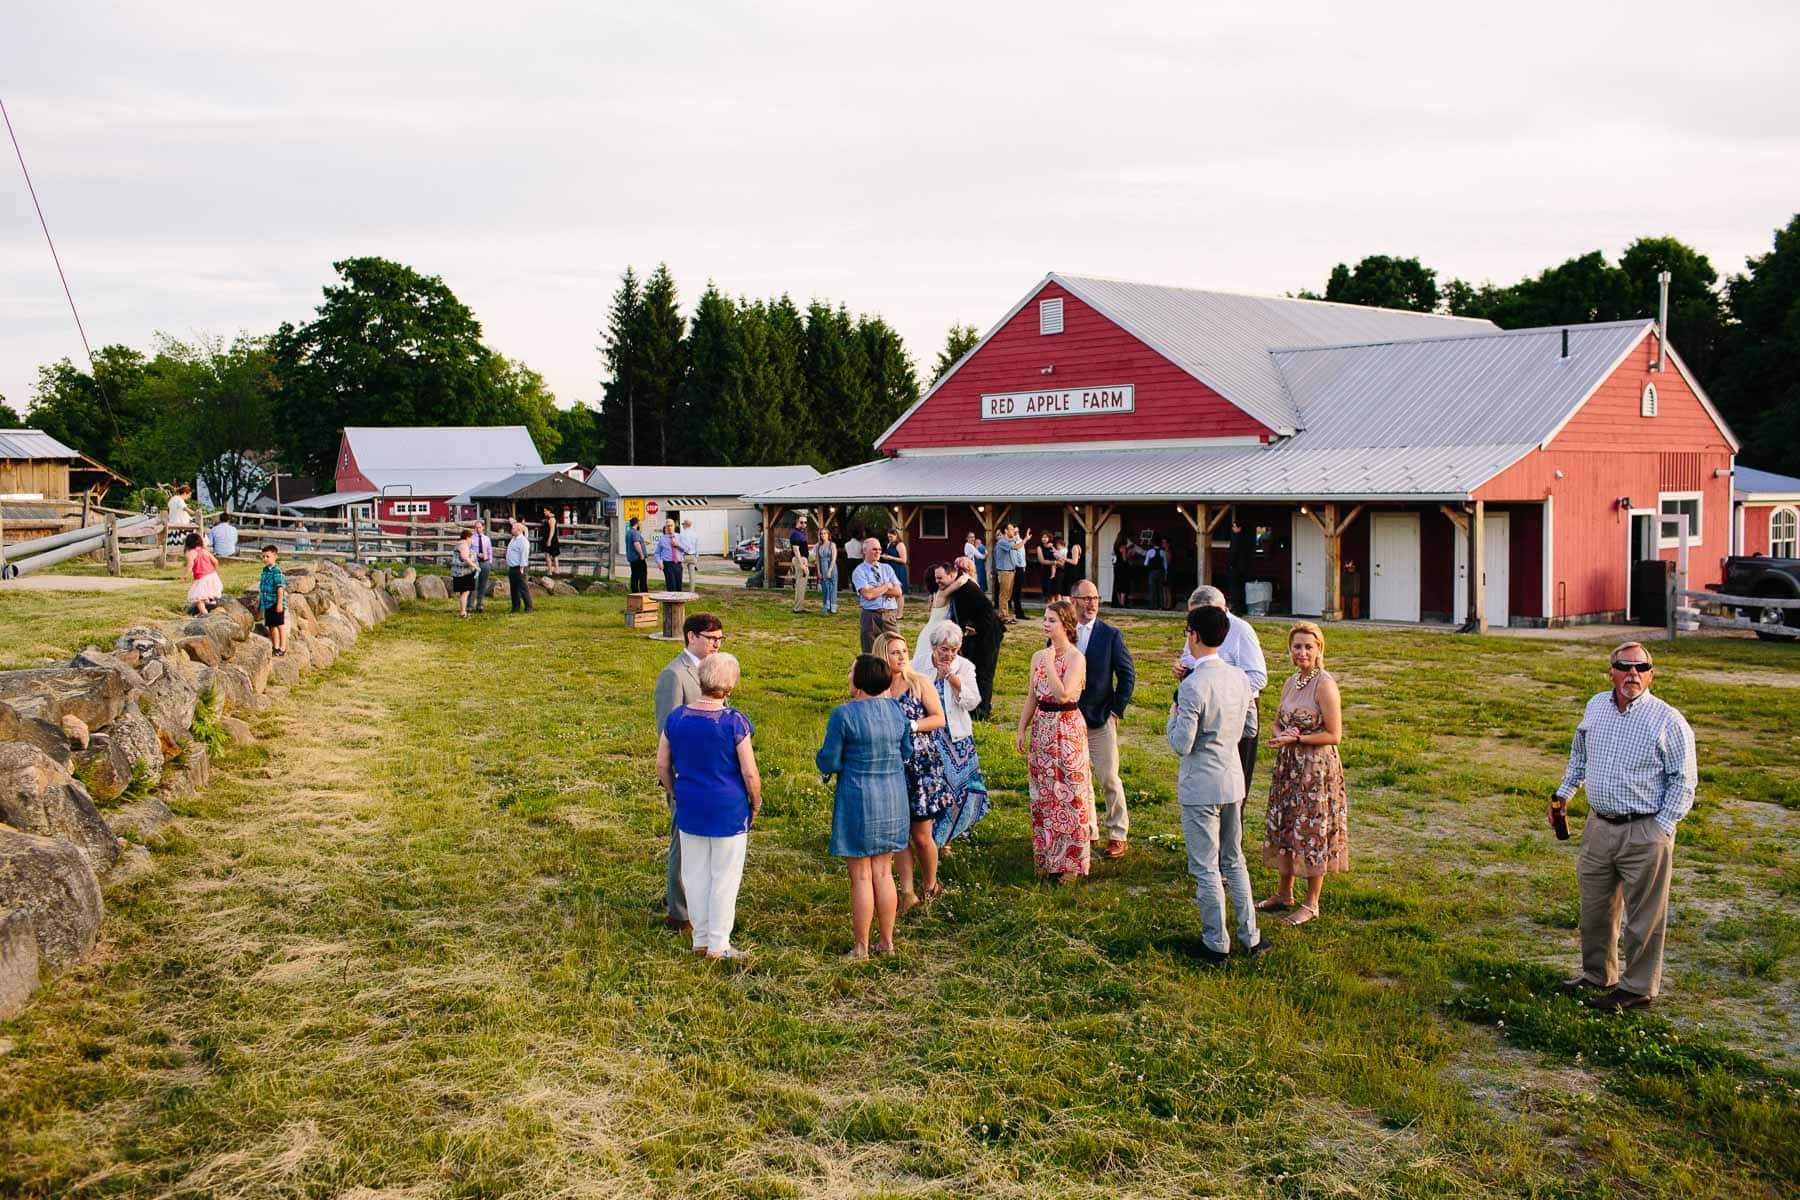 guests enjoy the evening air outside the barn at Red Apple Farm, Phillipston, MA